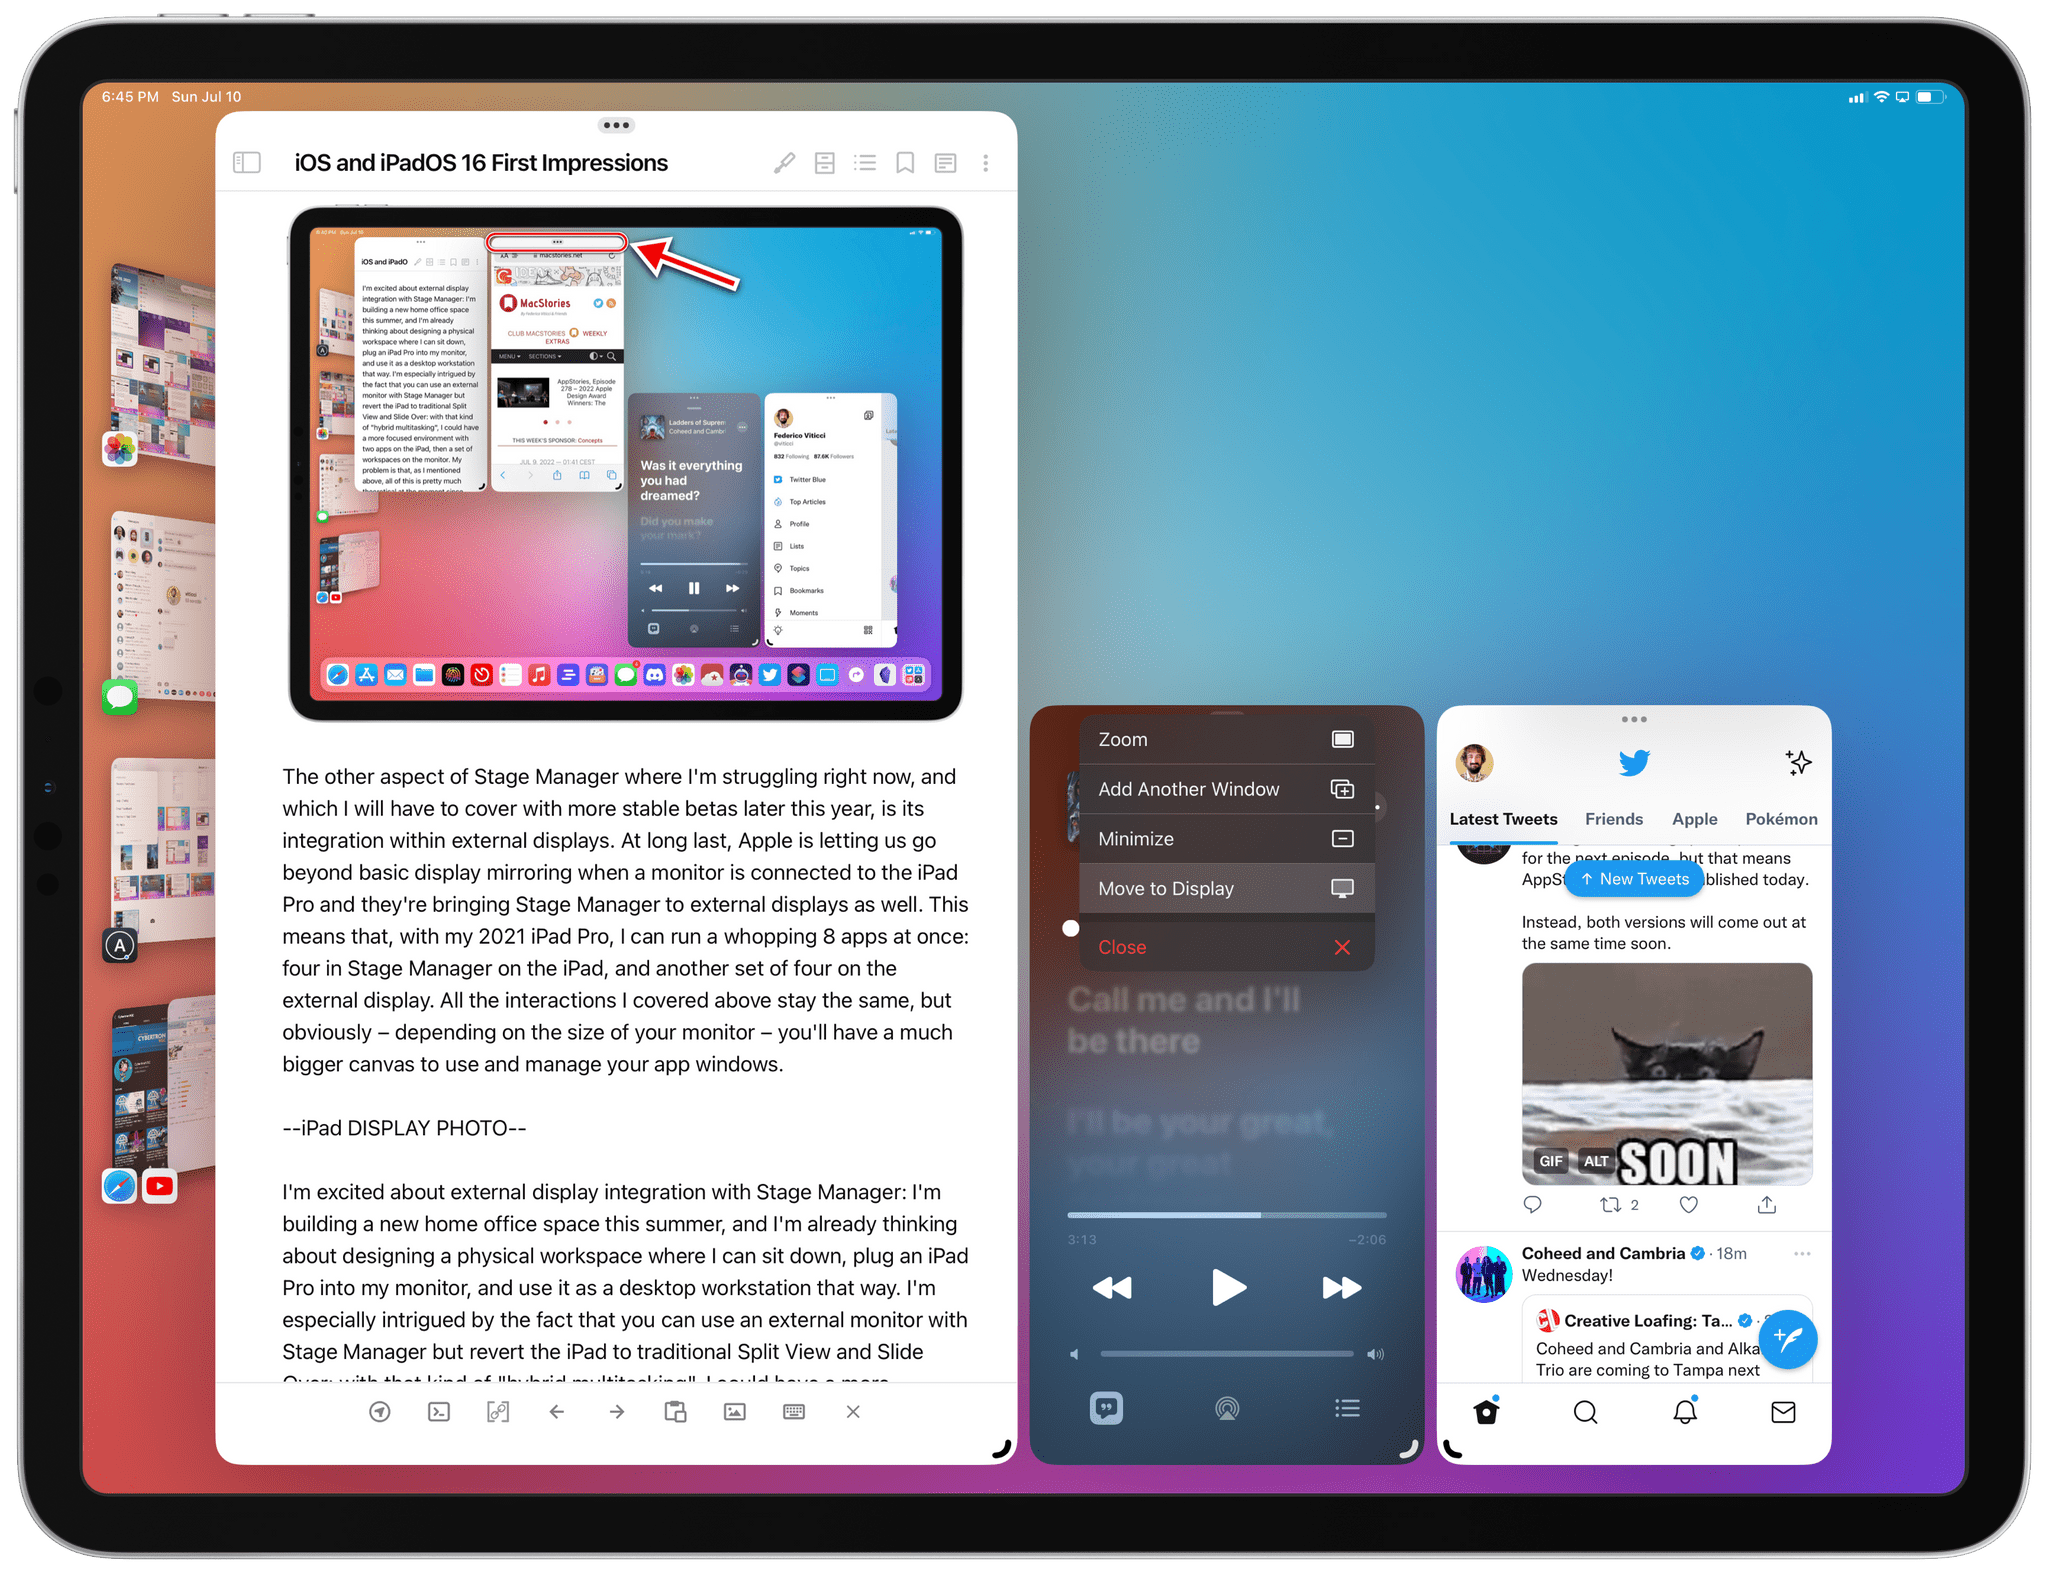 When a display is connected, a 'Move to Display' button gets added to the multitasking menu.